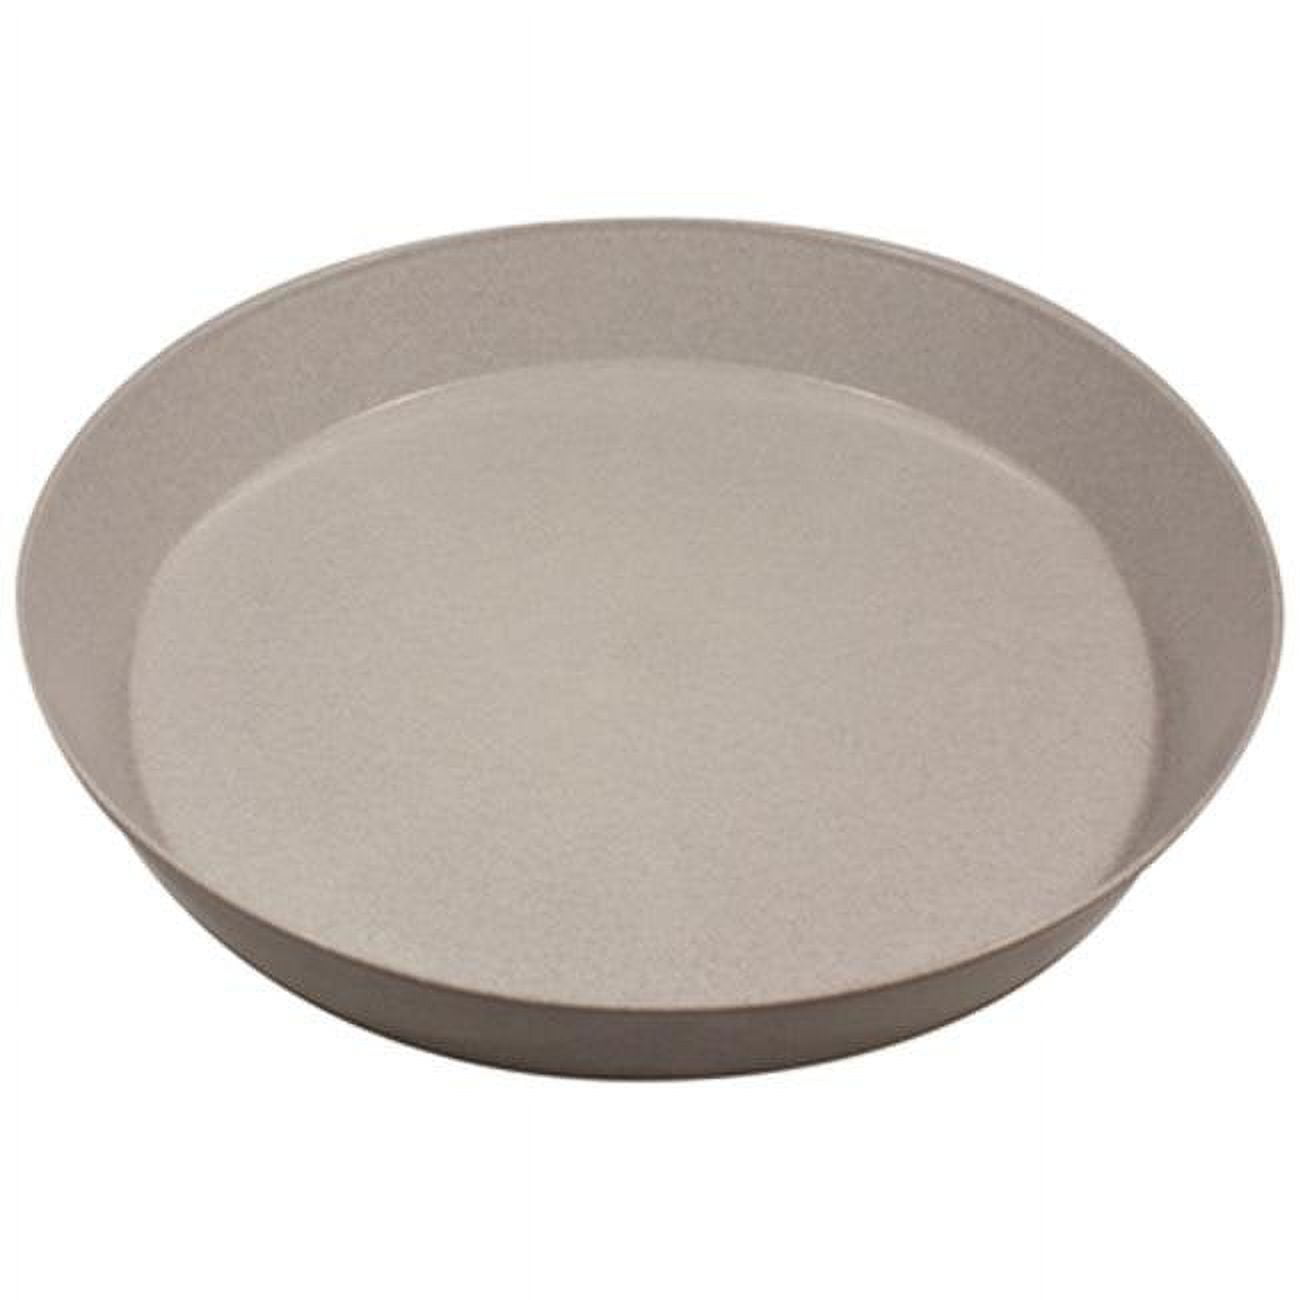 Picture of Austin Planter 18AS-G5pack 18 in. Granite Saucer - Pack of 5